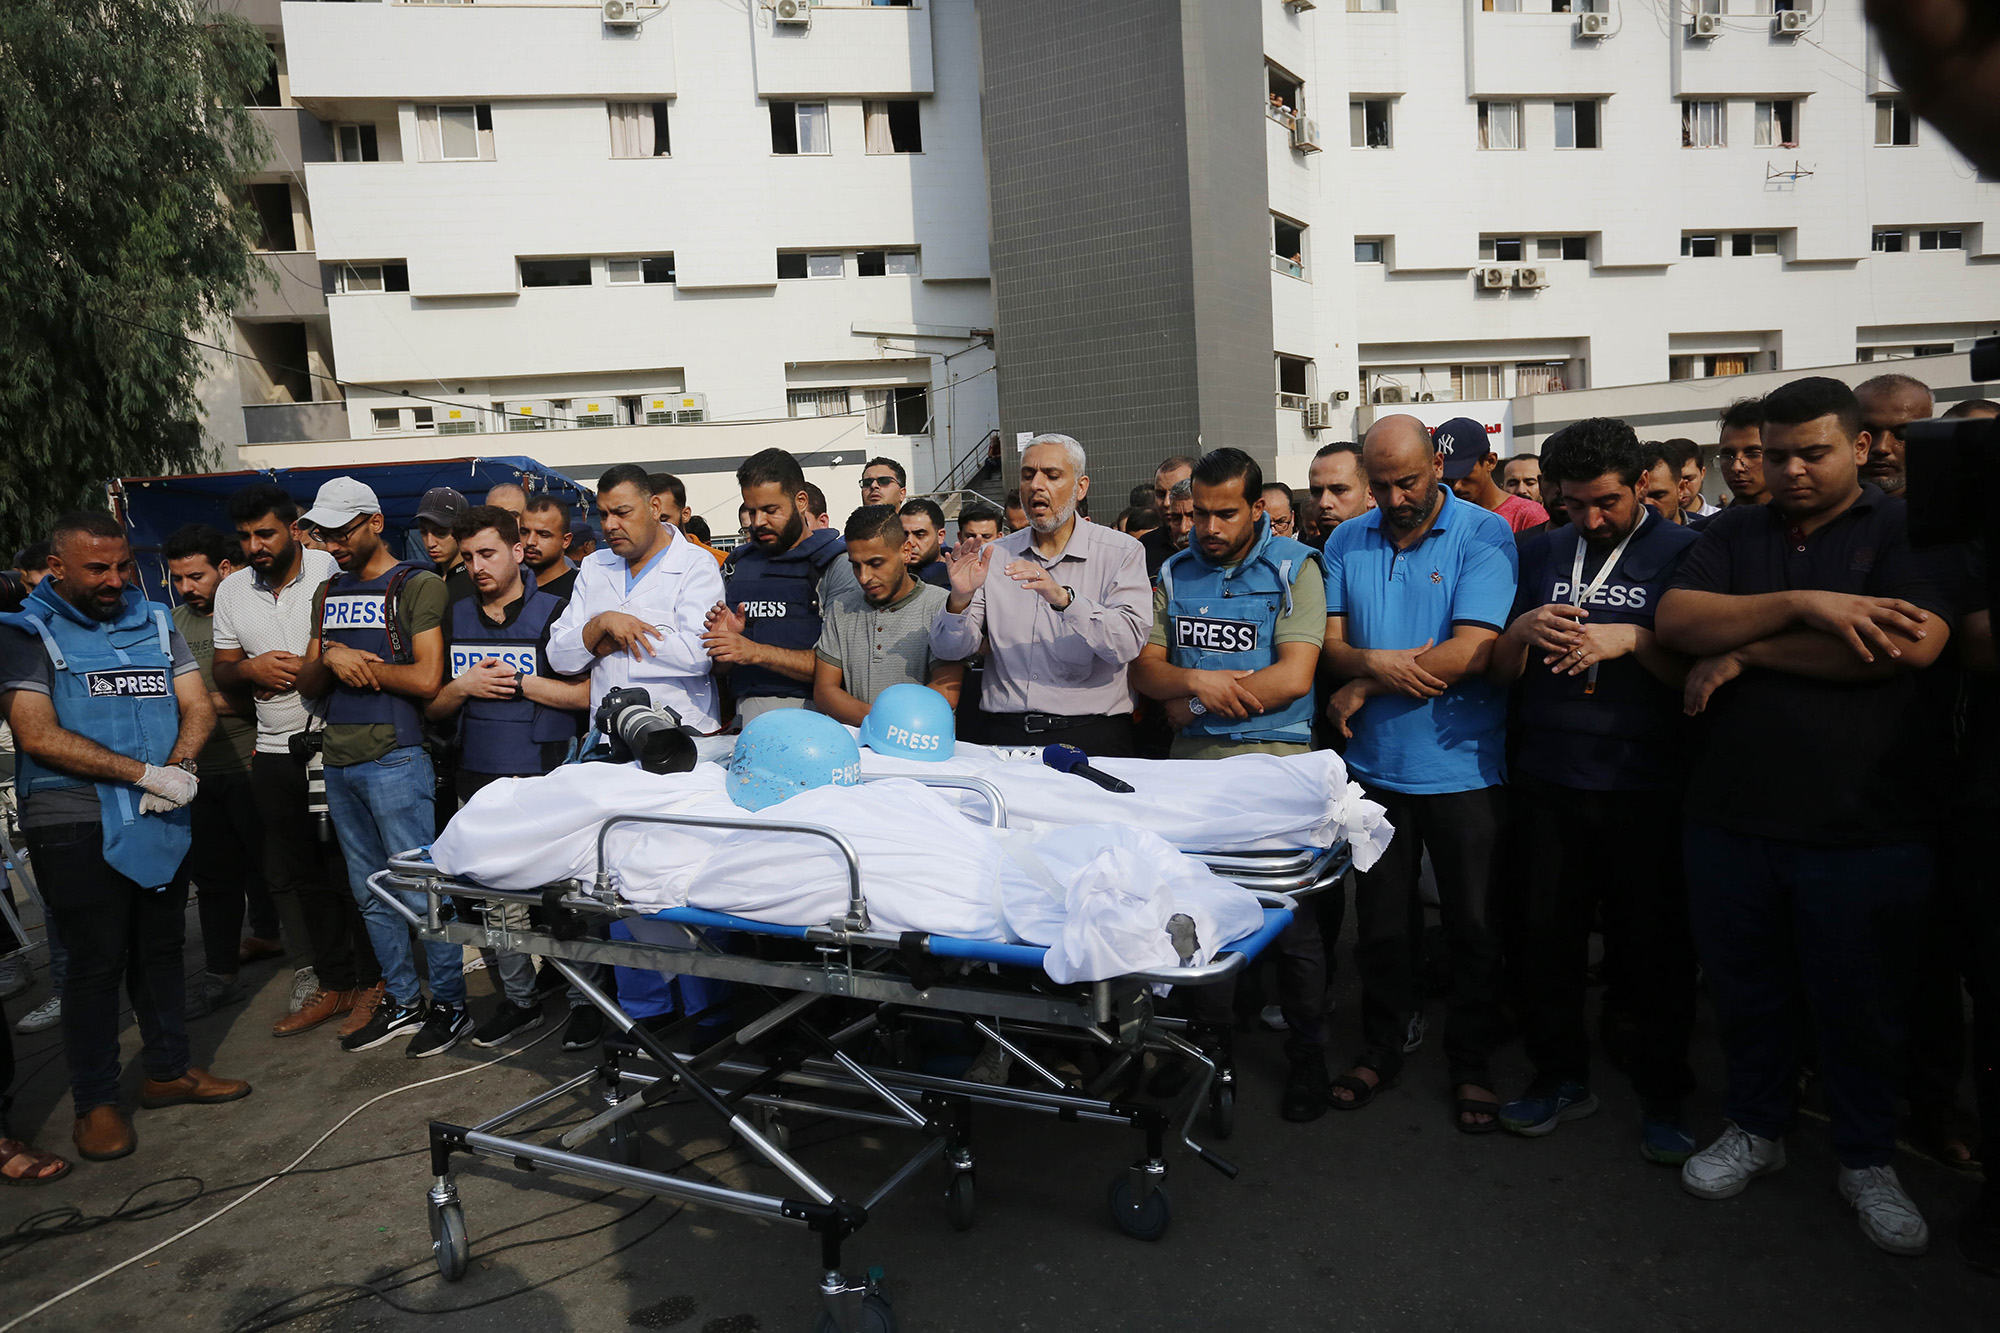 Relatives and colleagues of Palestinian journalists Saeed Al-Taweel and Mohammad Sobh, who were killed in Israeli airstrikes, perform funeral prayer in Gaza on October 10.